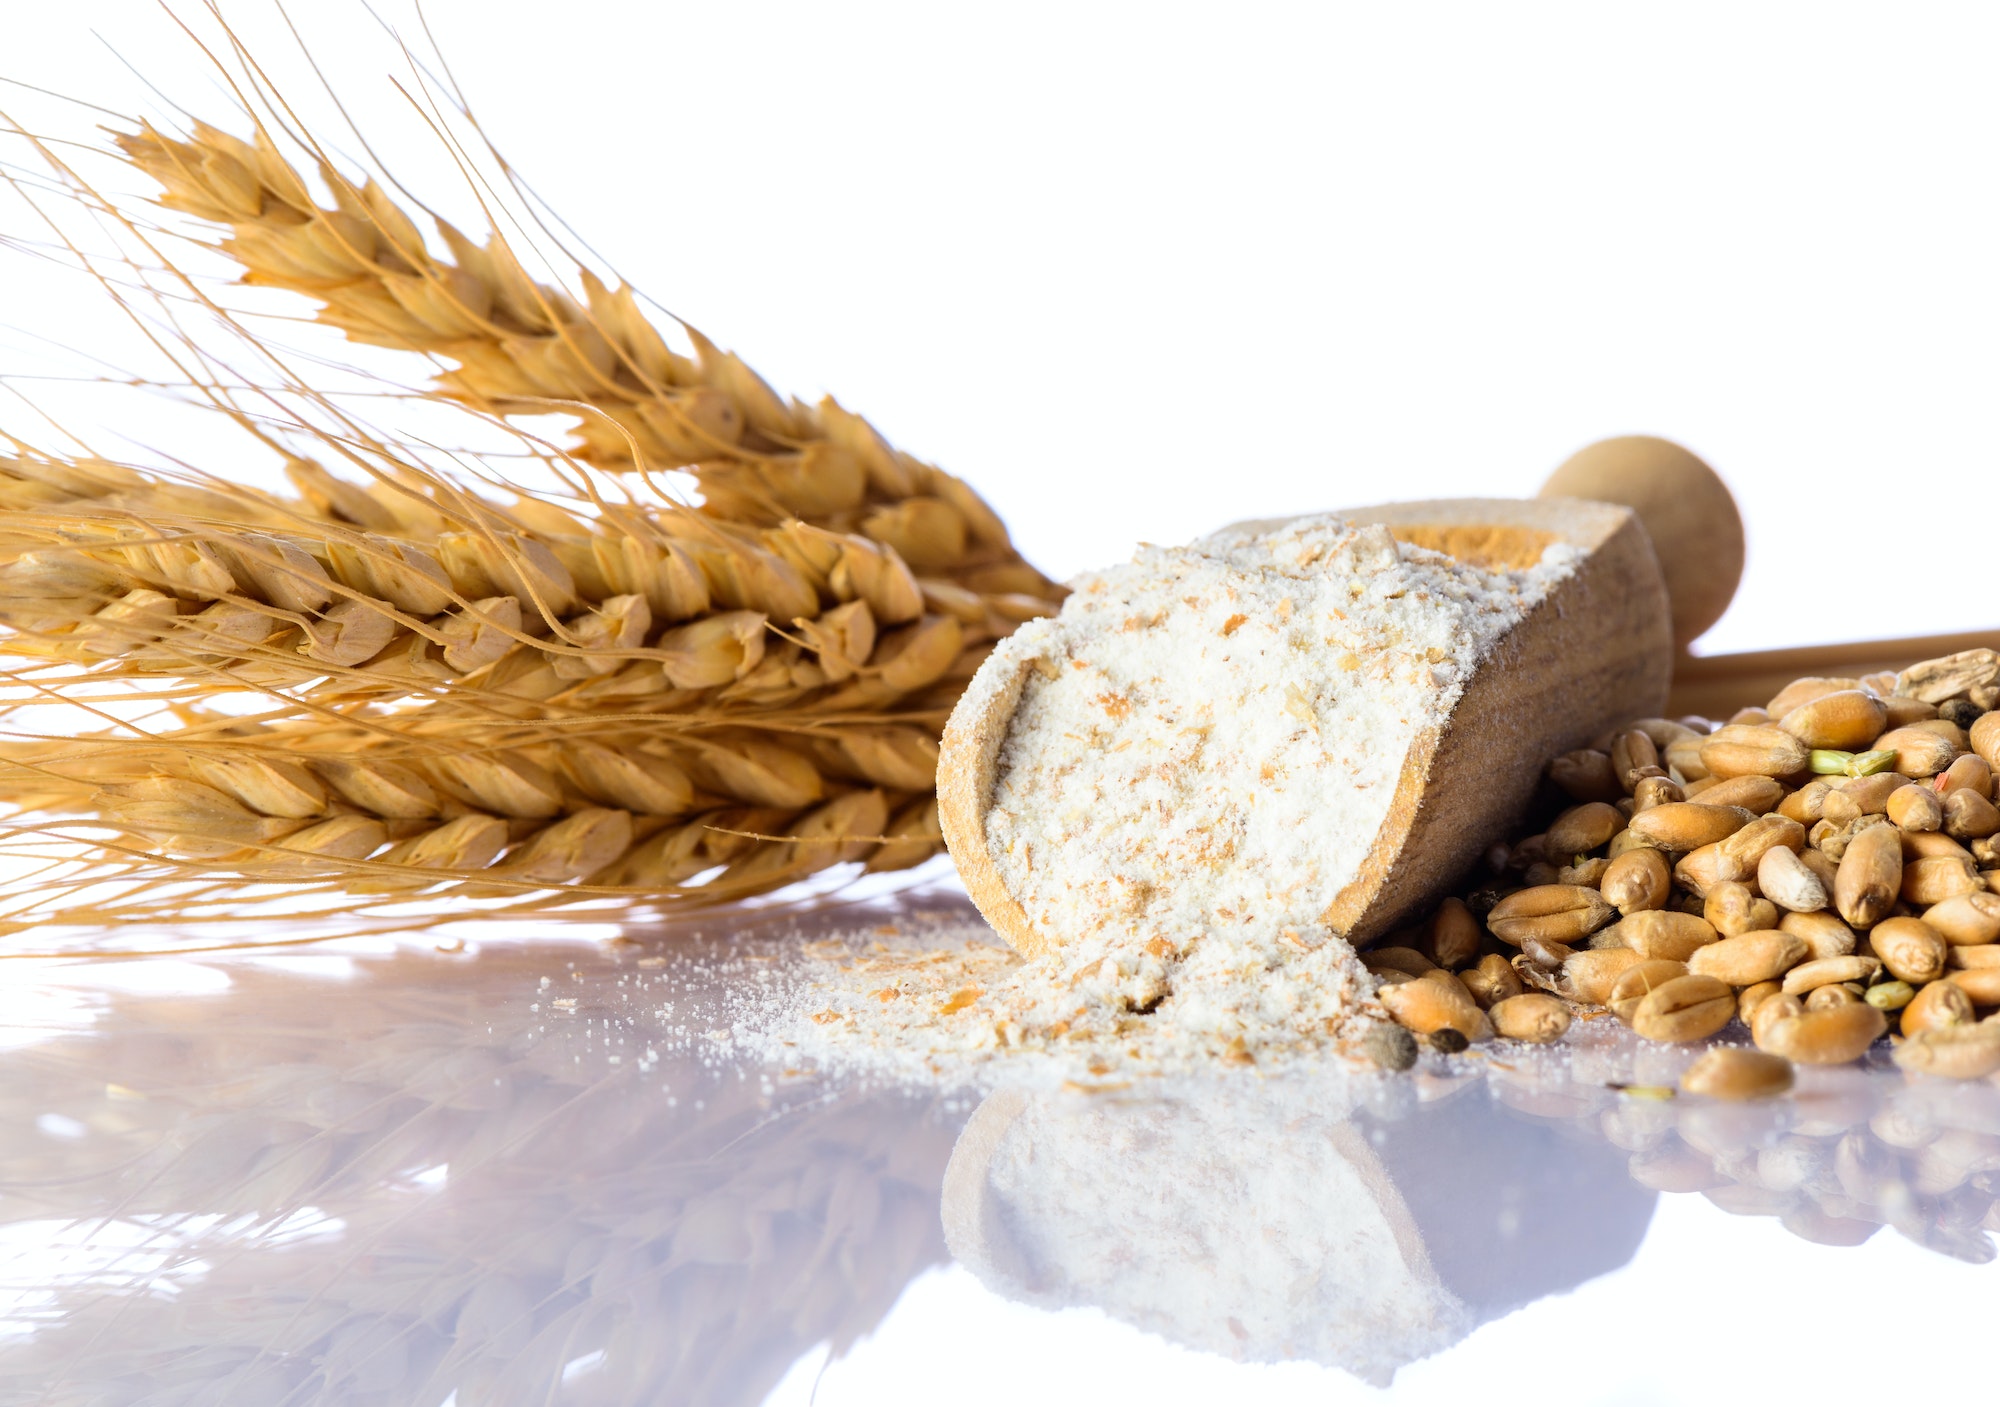 Flour, Wheat and Cereal Grain